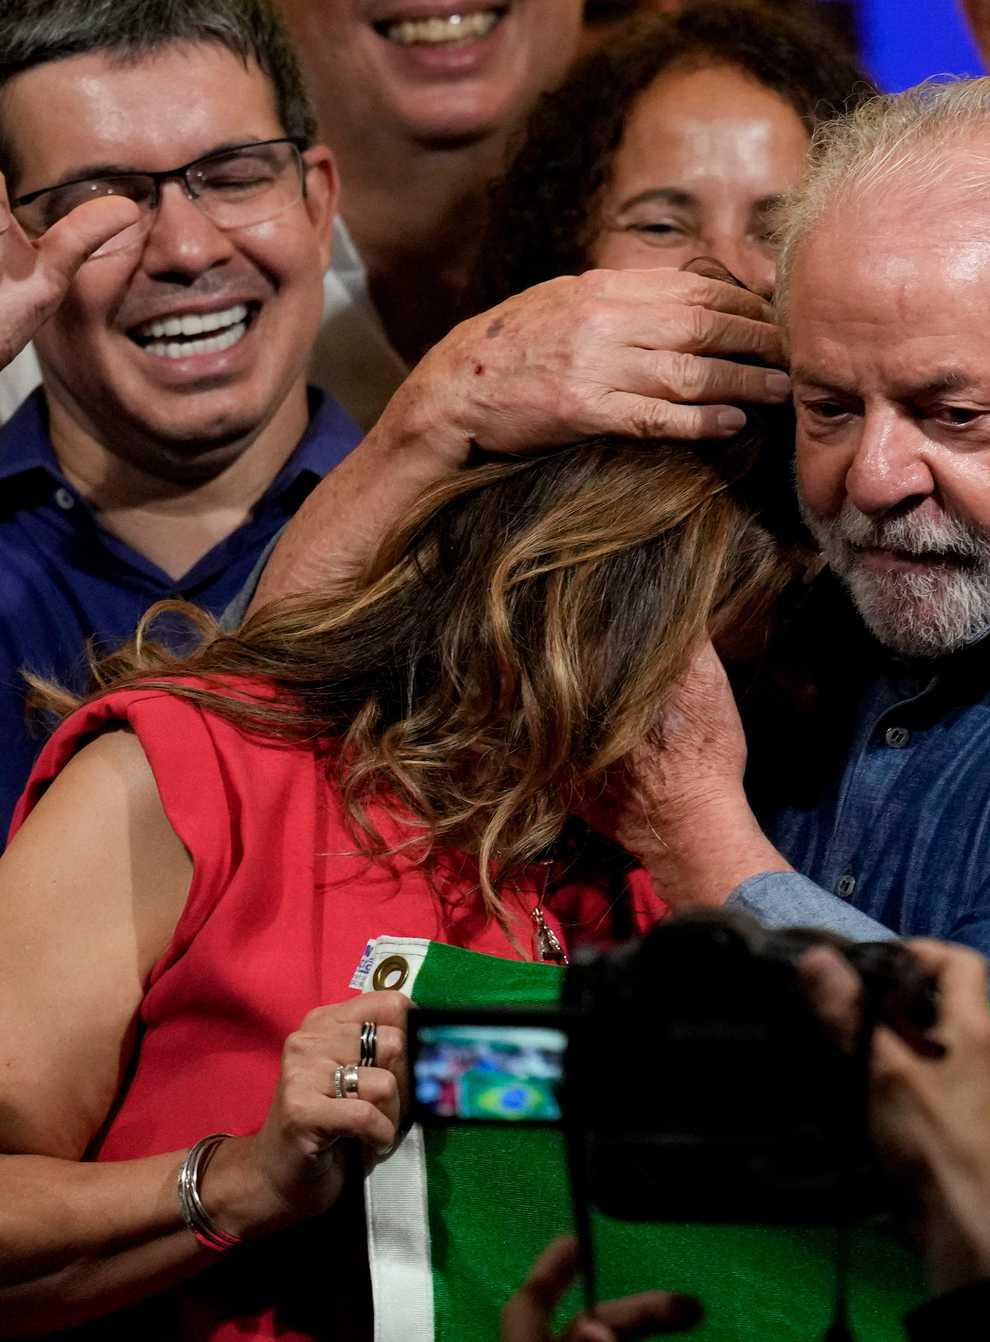 Brazilians delivered a very tight victory to Luiz Inácio Lula da Silva in a bitter presidential election, giving the leftist former president another shot at power in a rejection of incumbent Jair Bolsonaro’s far-right politics (Andre Penner/AP)